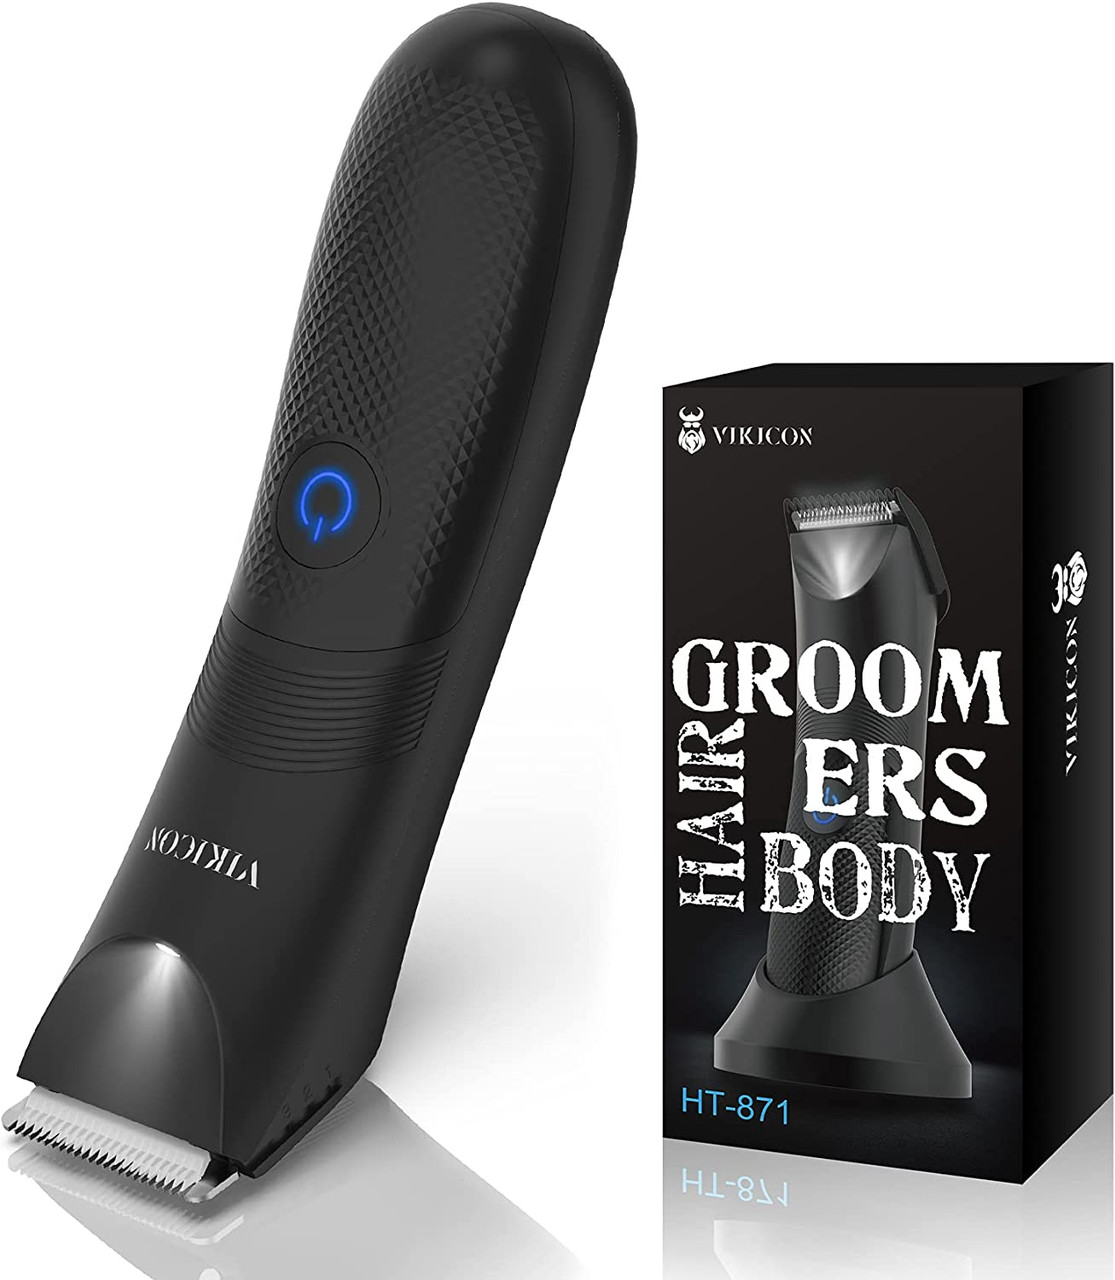 Electric Body Hair Trimmer and Shaver for Men, VIKICON Body Groomer for  Groin&Ball w/Lighting, Pubic